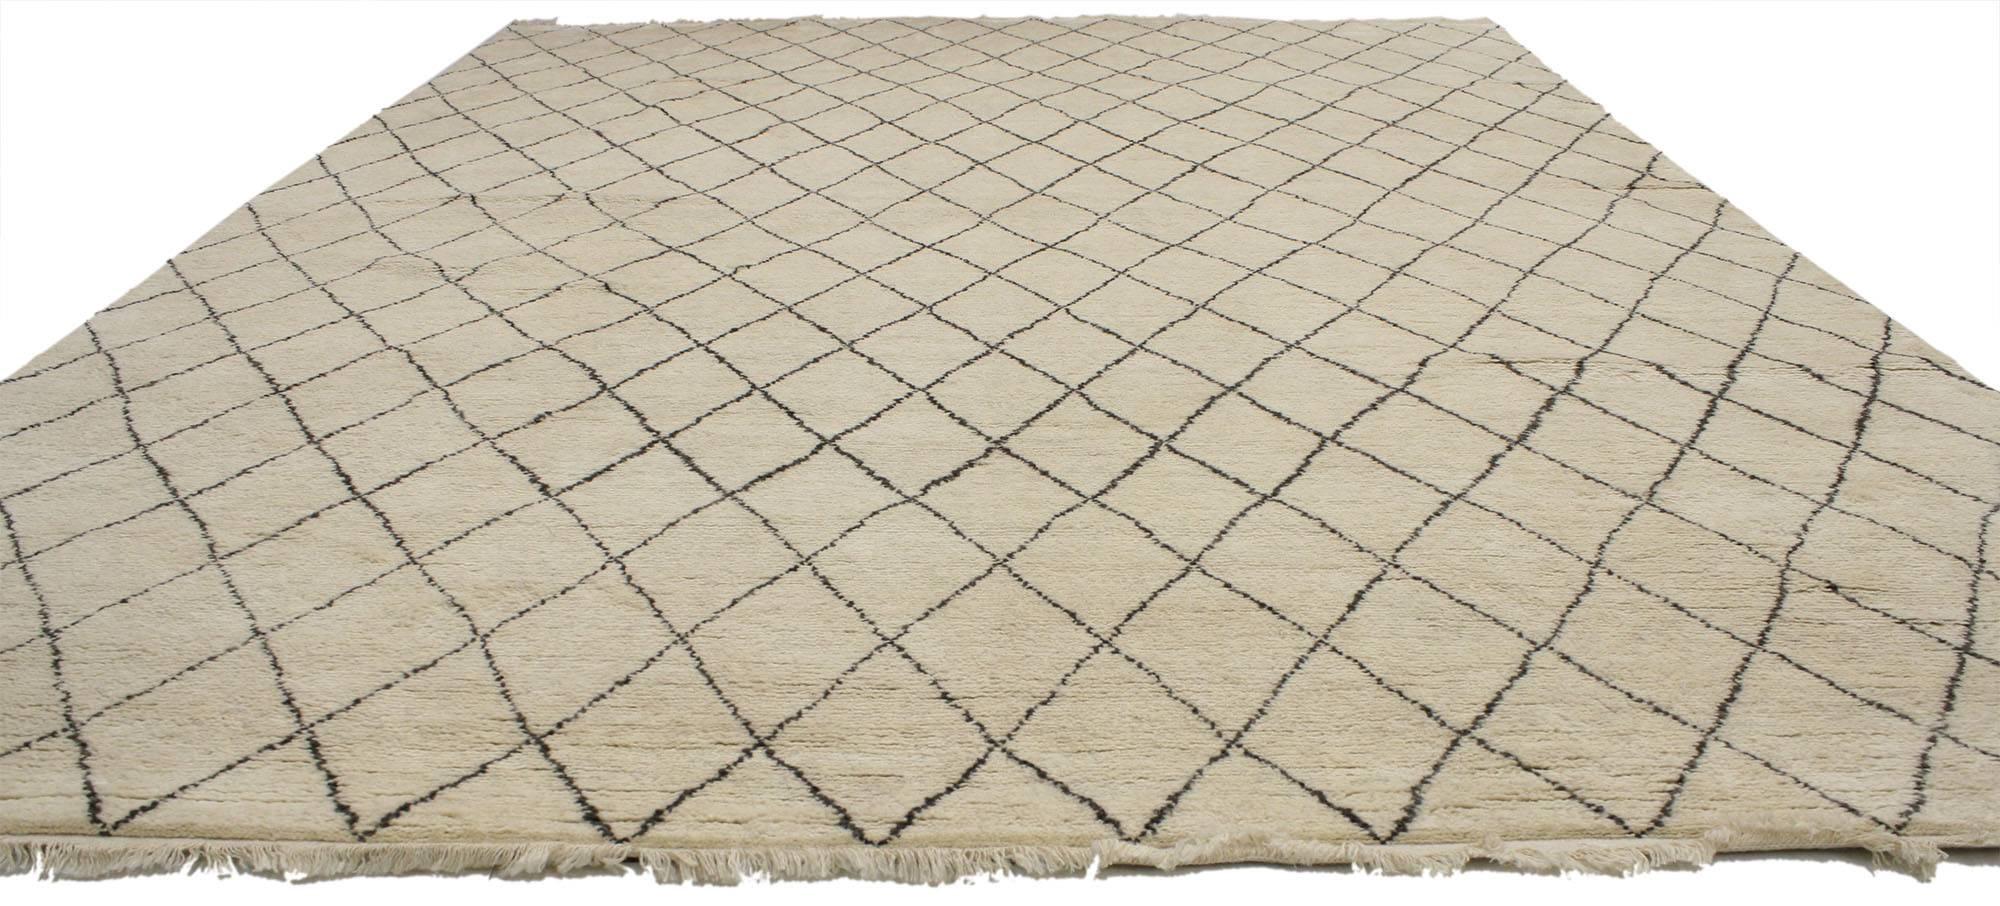 30338, New Contemporary  Moroccan Rug with Organic Modern Style. With organic modern style with hygge vibes and cozy contentment, this hand knotted wool contemporary Moroccan area rug adds texture and subtle graphic appeal forming a warm, relaxed